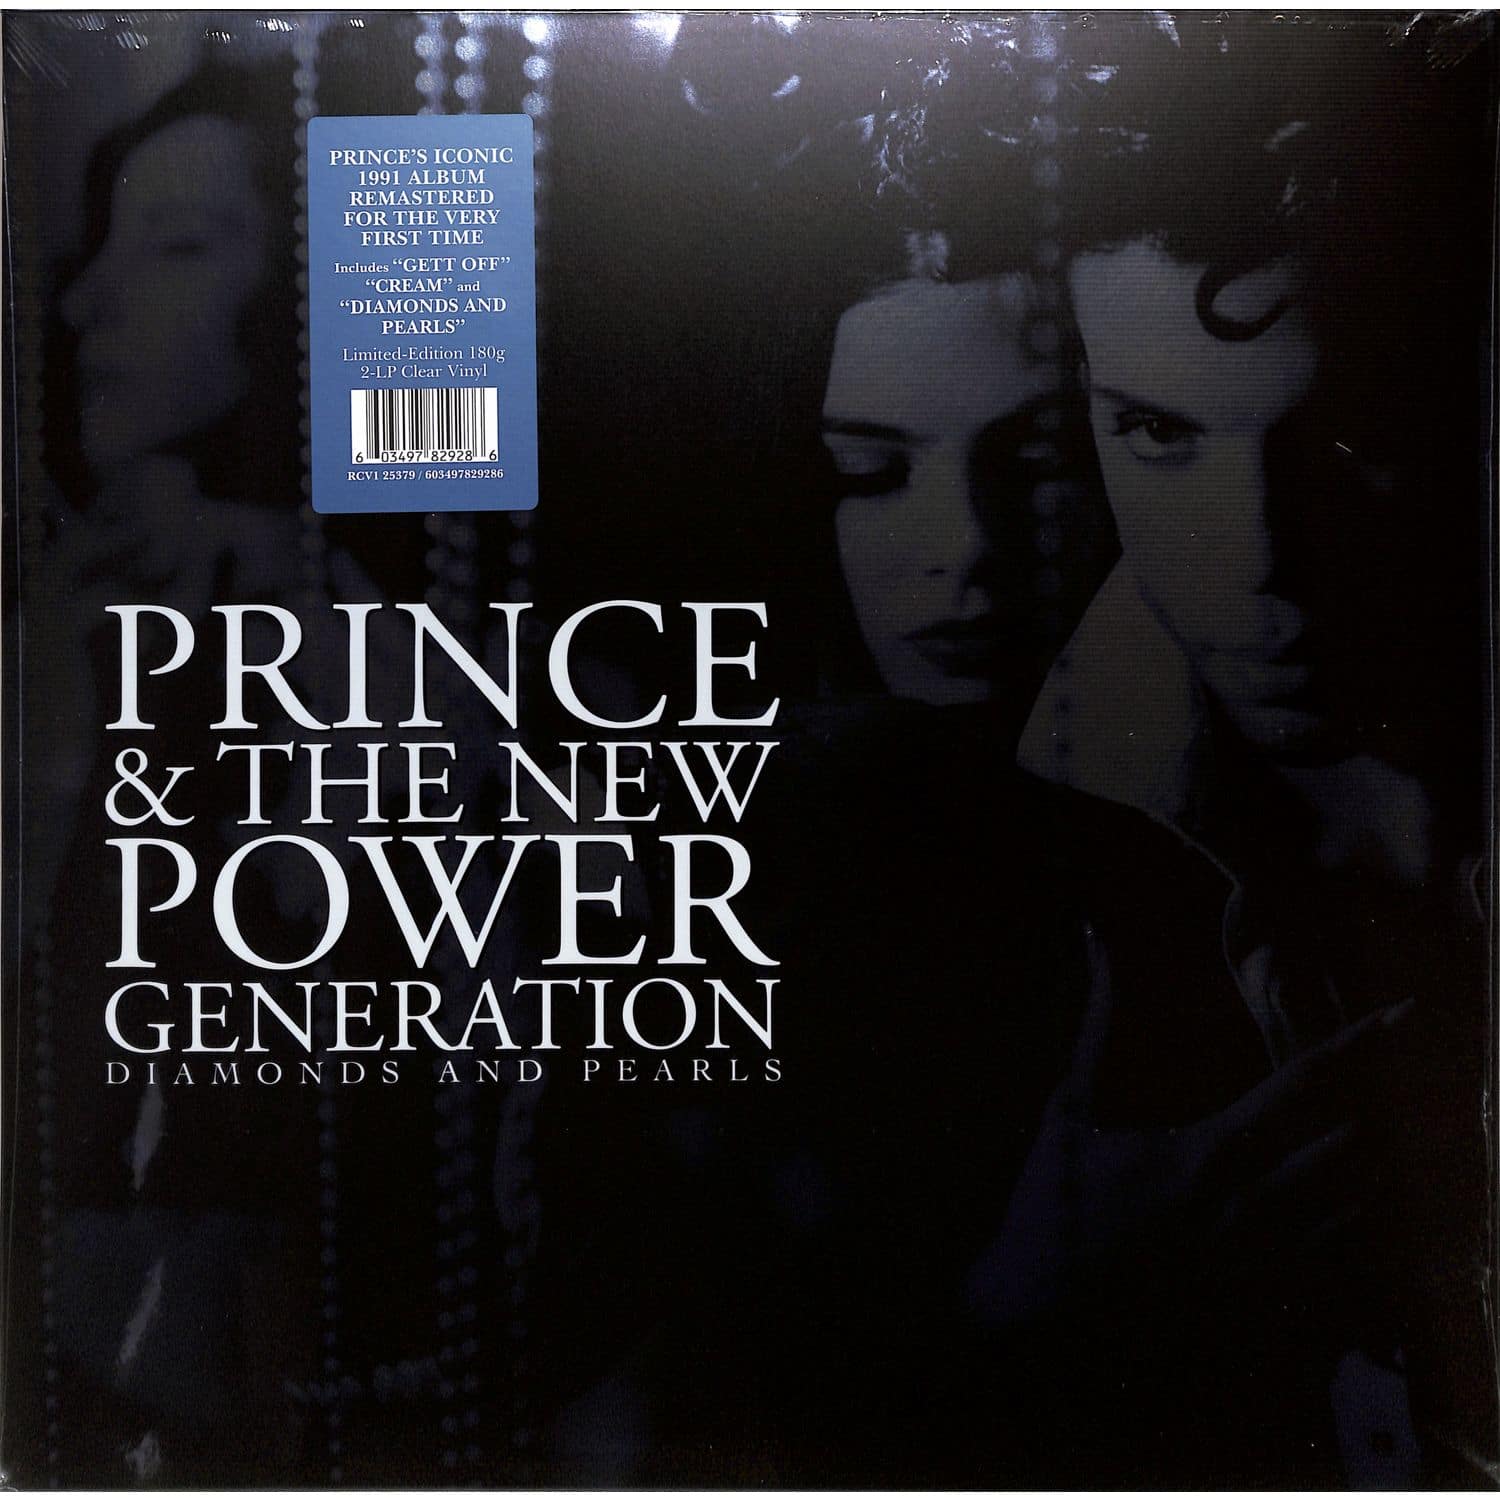 Prince & The New Power Generation - DIAMONDS AND PEARLS 